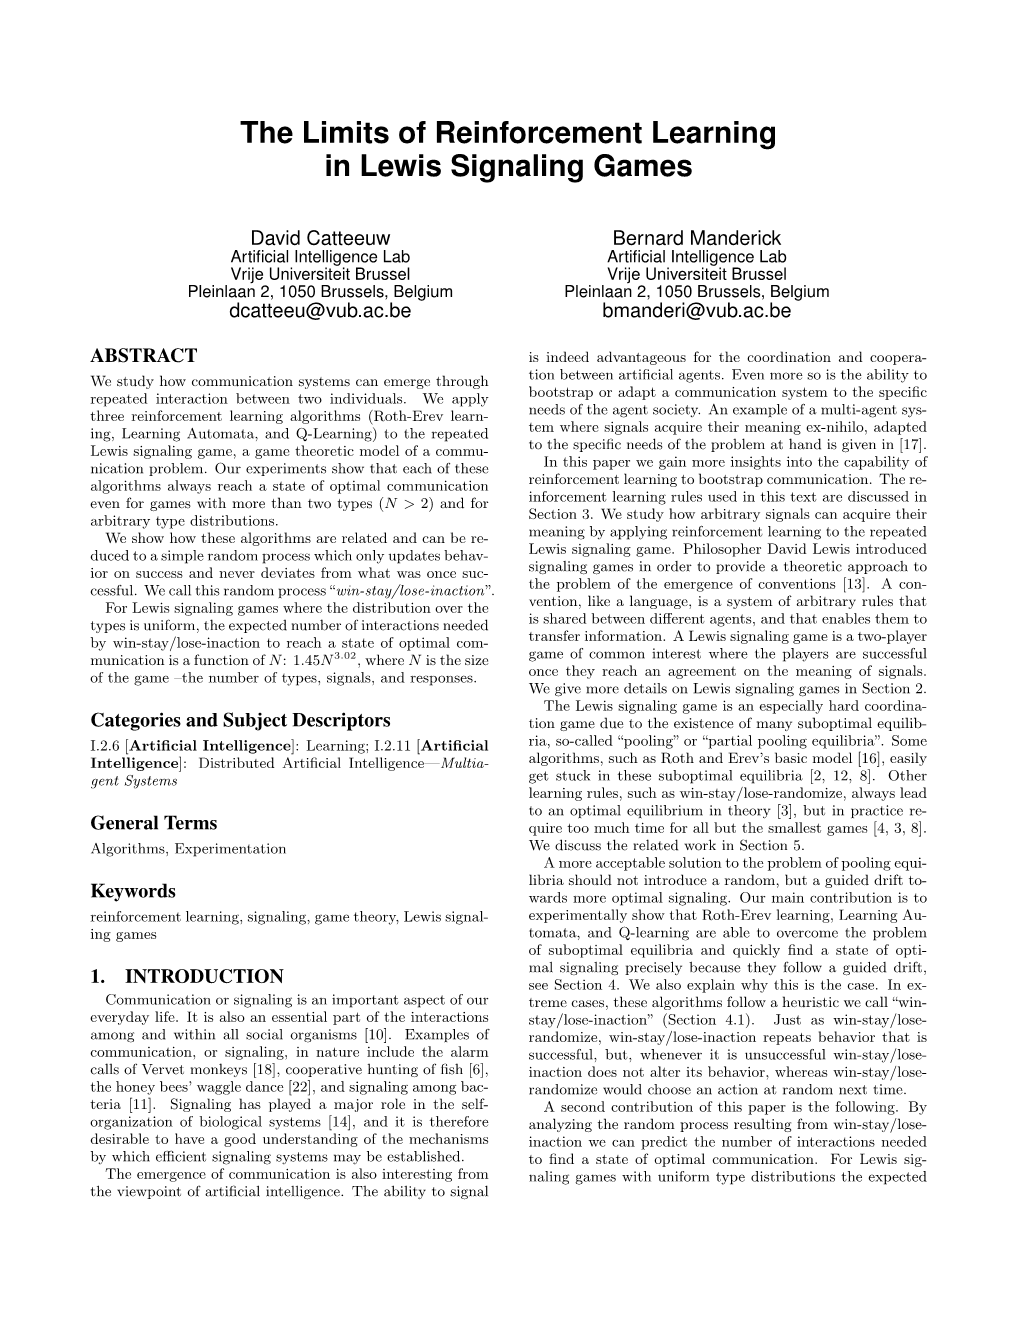 The Limits of Reinforcement Learning in Lewis Signaling Games